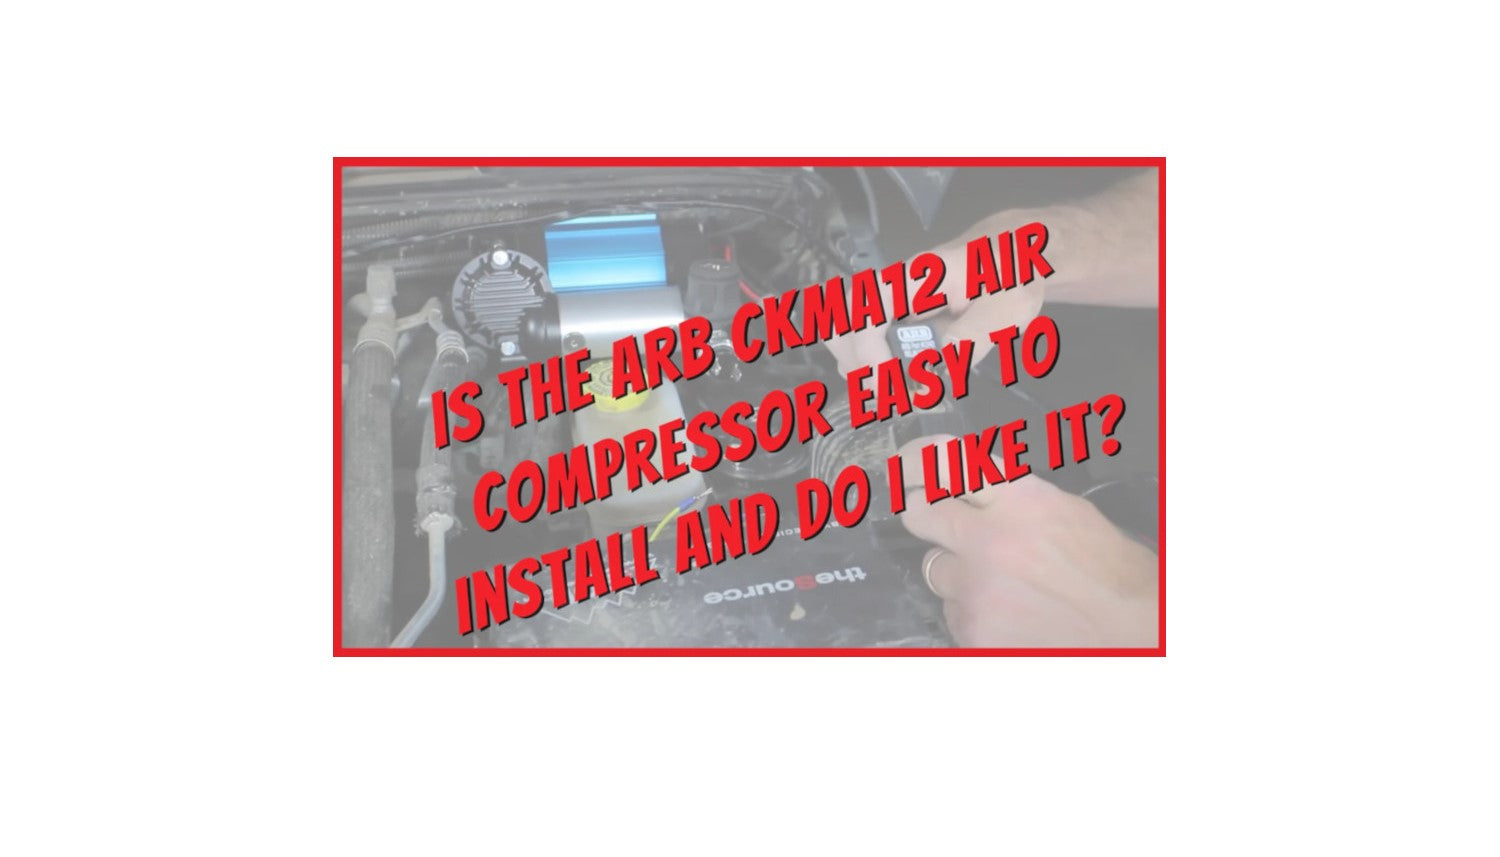 Is the ARB CKMA12 Air Compressor Easy to Install and Do I Like It?